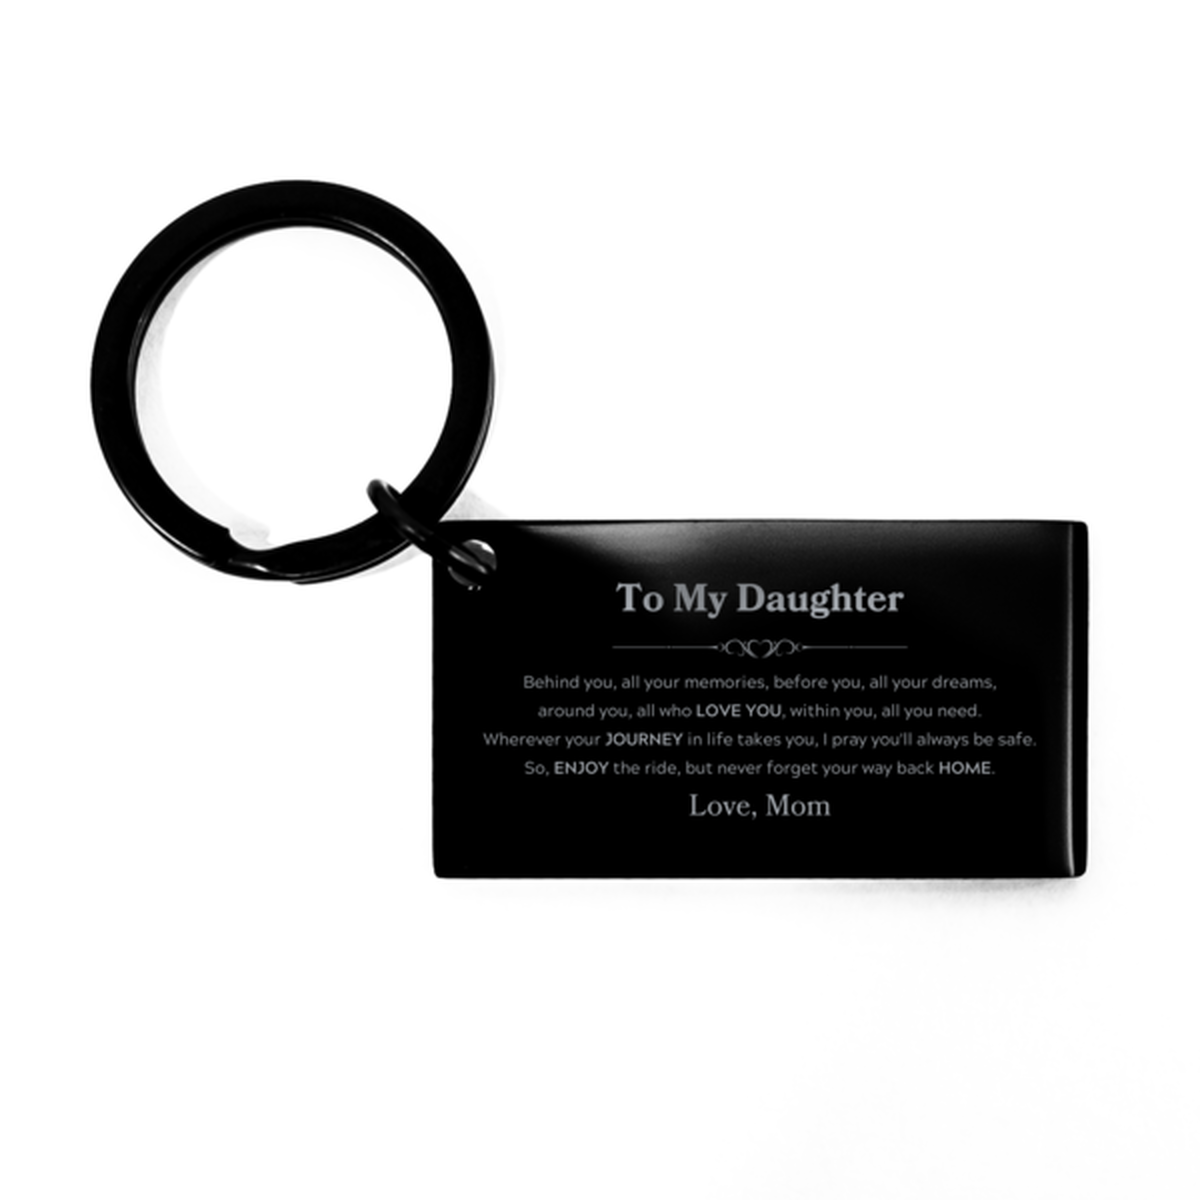 To My Daughter Graduation Gifts from Mom, Daughter Keychain Christmas Birthday Gifts for Daughter Behind you, all your memories, before you, all your dreams. Love, Mom